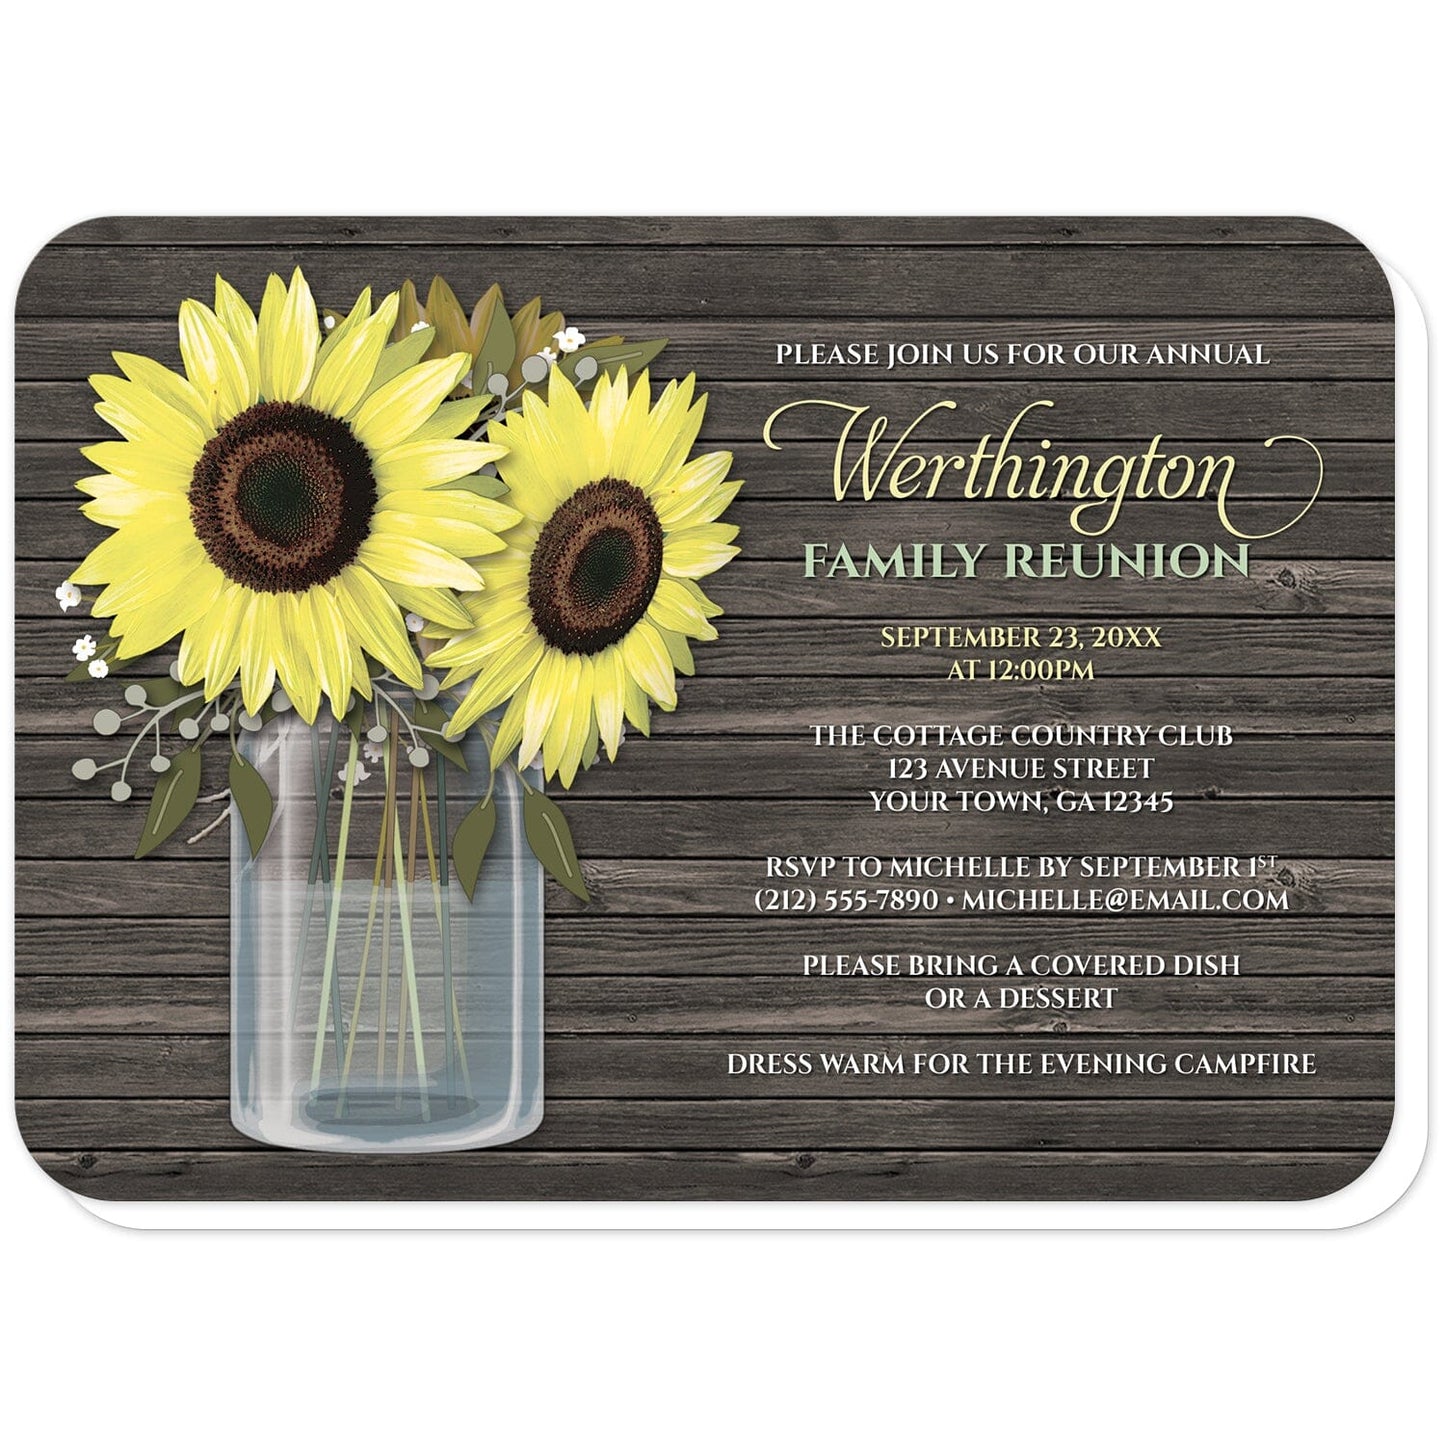 Rustic Sunflower Wood Mason Jar Family Reunion Invitations (with rounded corners) at Artistically Invited. Southern country-inspired rustic sunflower wood mason jar family reunion invitations with big yellow sunflowers, small accents of baby's breath, and green leaves in a glass mason jar illustration. Your personalized reunion celebration details are custom printed in yellow, white, and light green to the right of the sunflowers and mason jar design over a dark brown wood background.